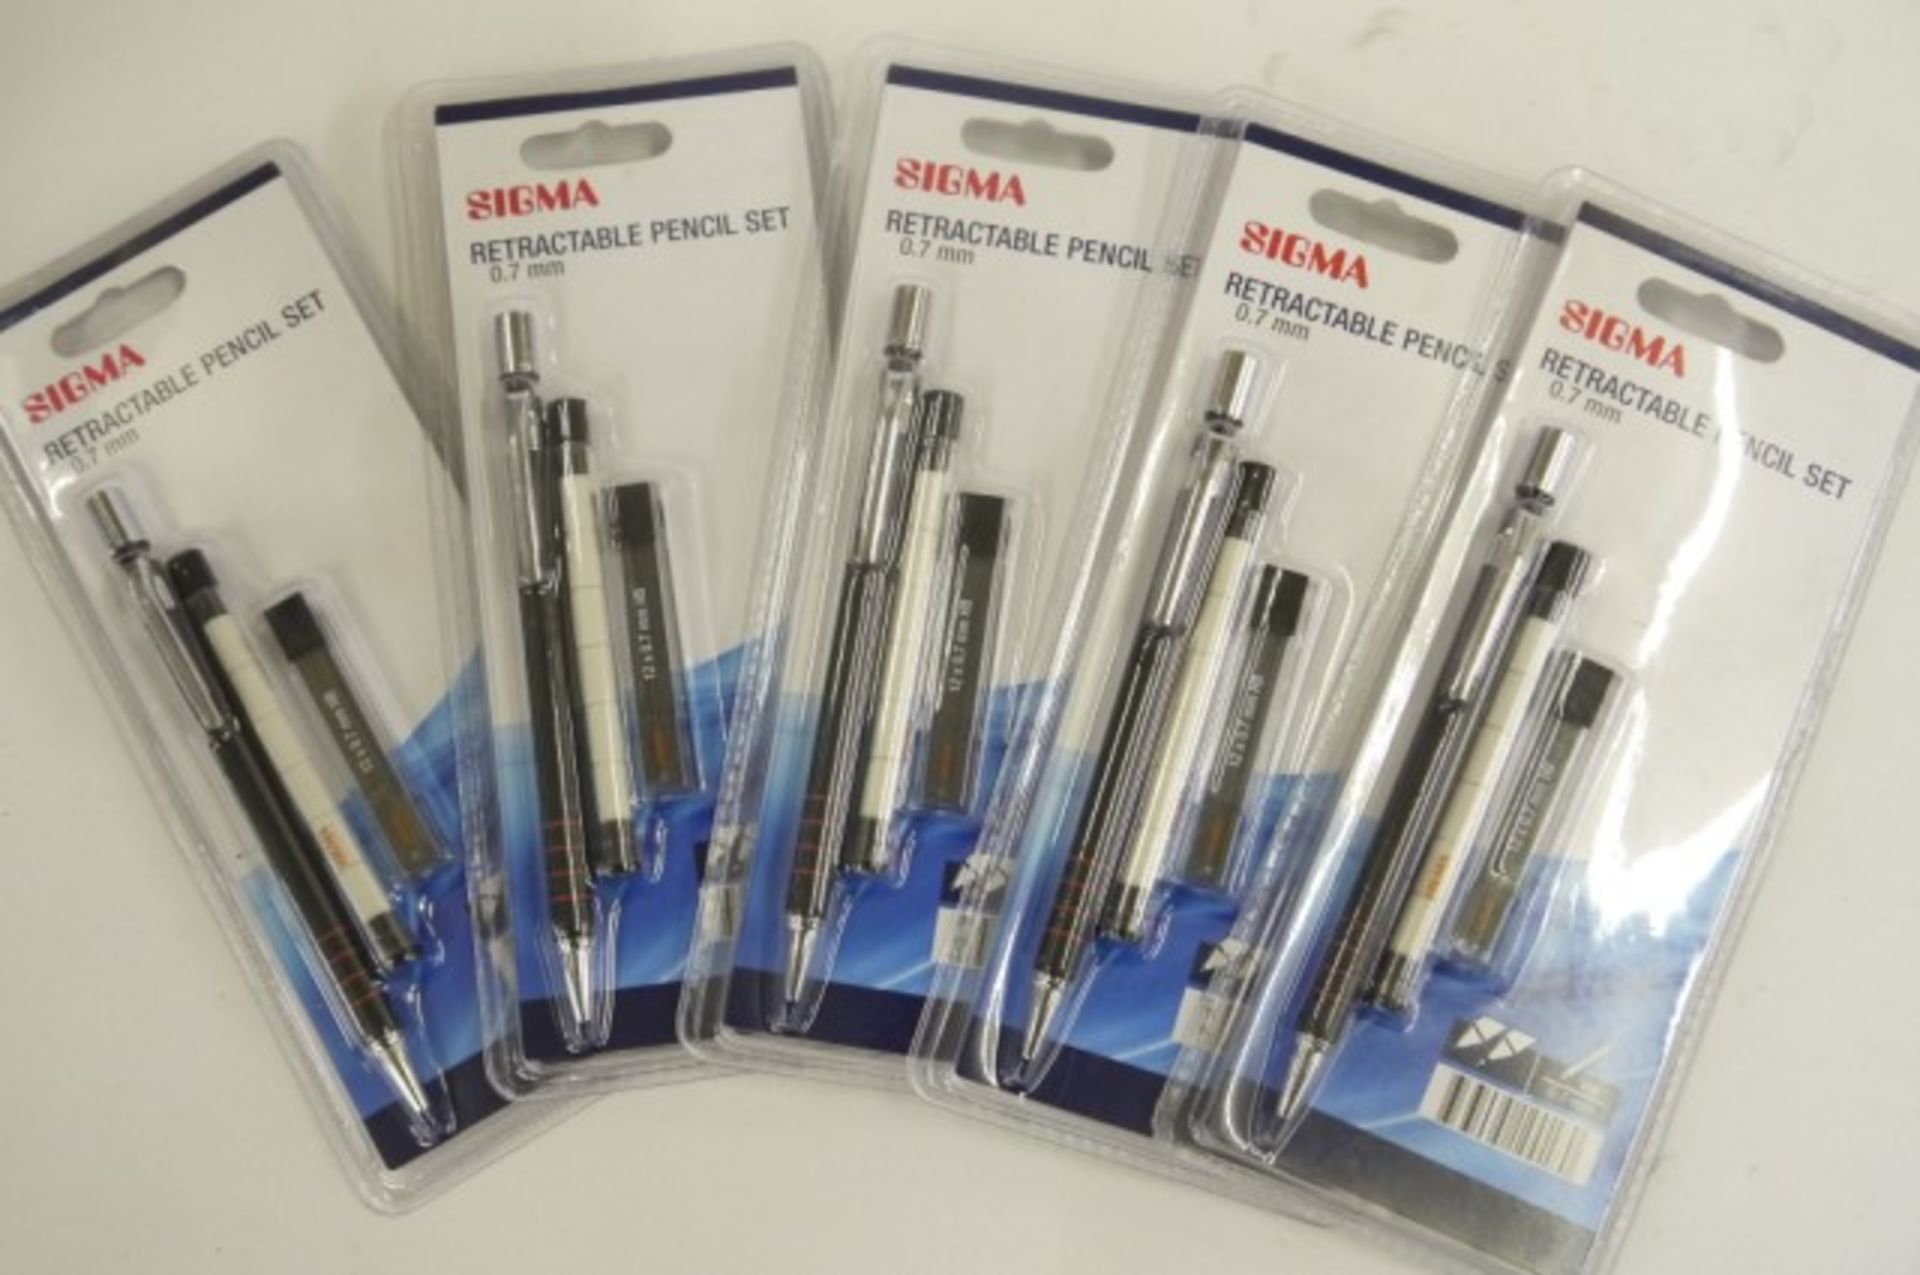 V Three Sigma Retractable Pencil Sets X  2  Bid price to be multiplied by Two